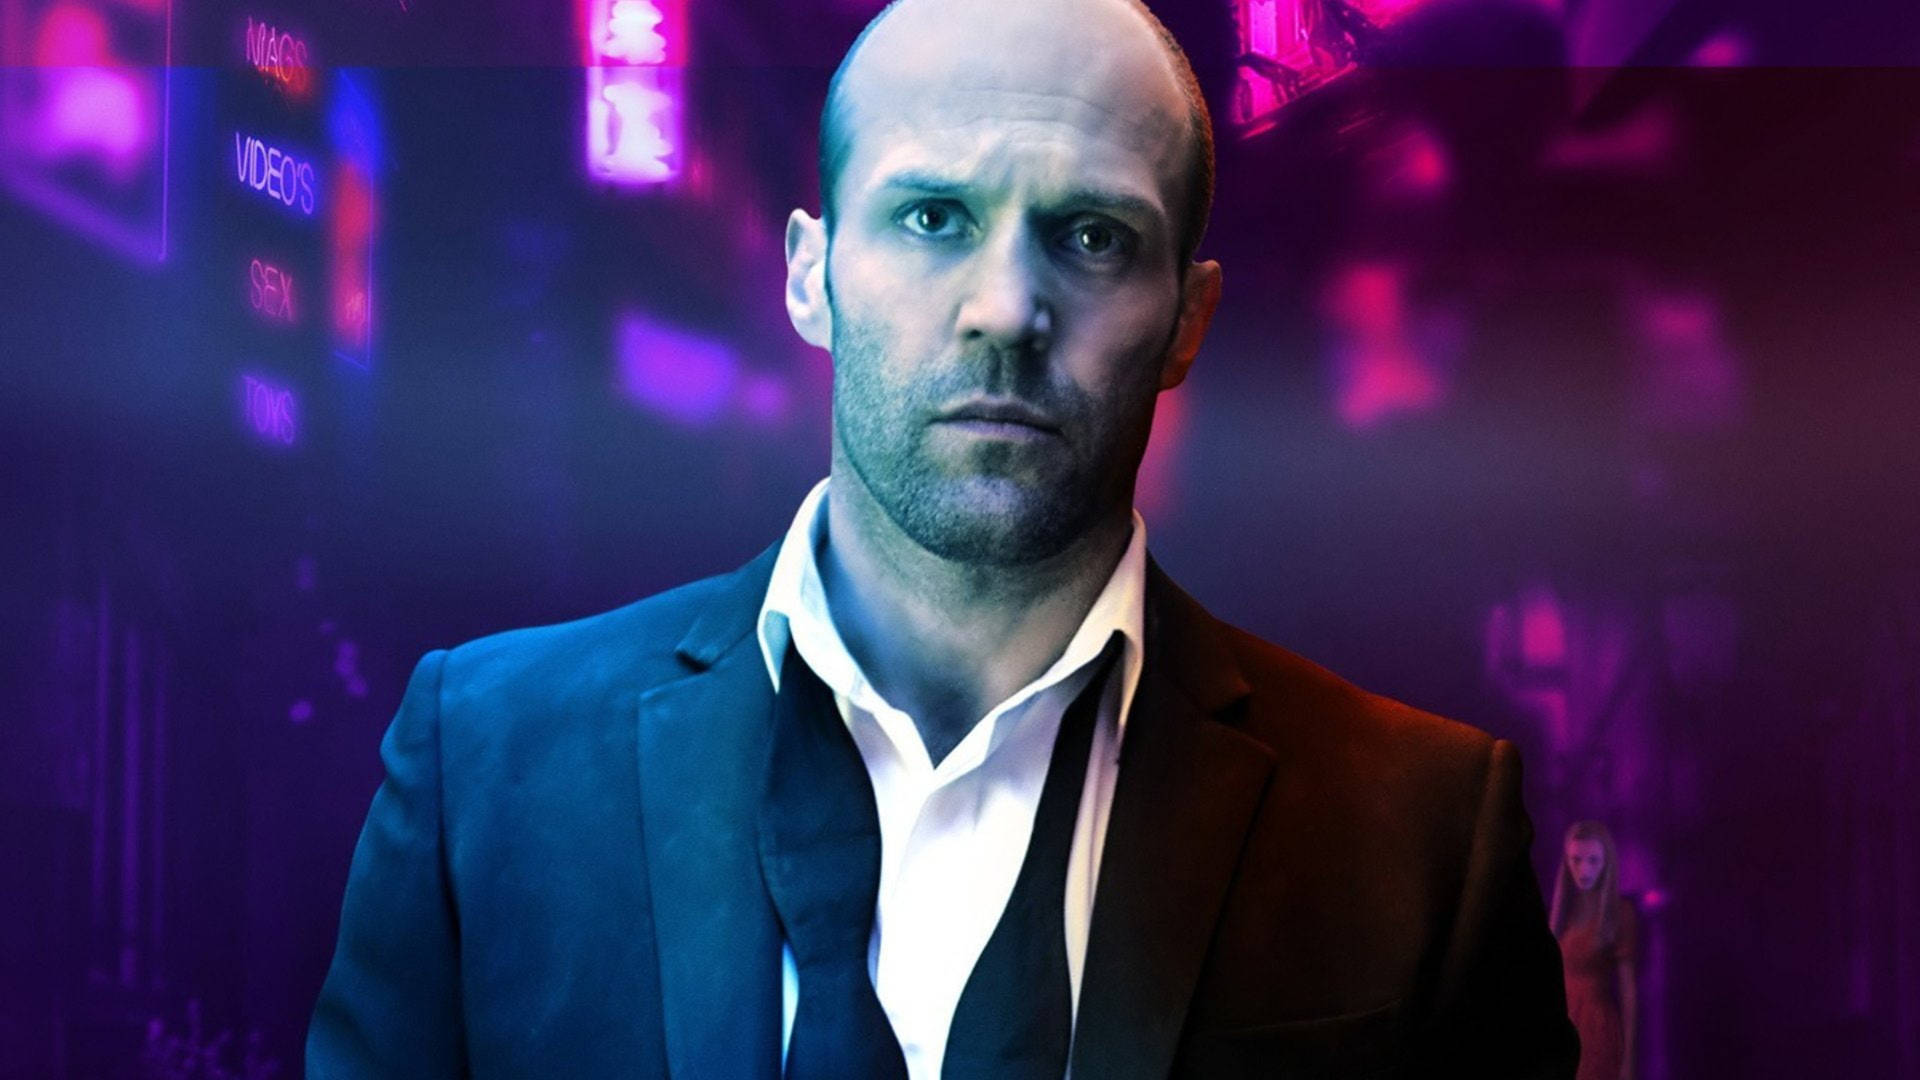 Jason Statham In Neon Aesthetic Picture